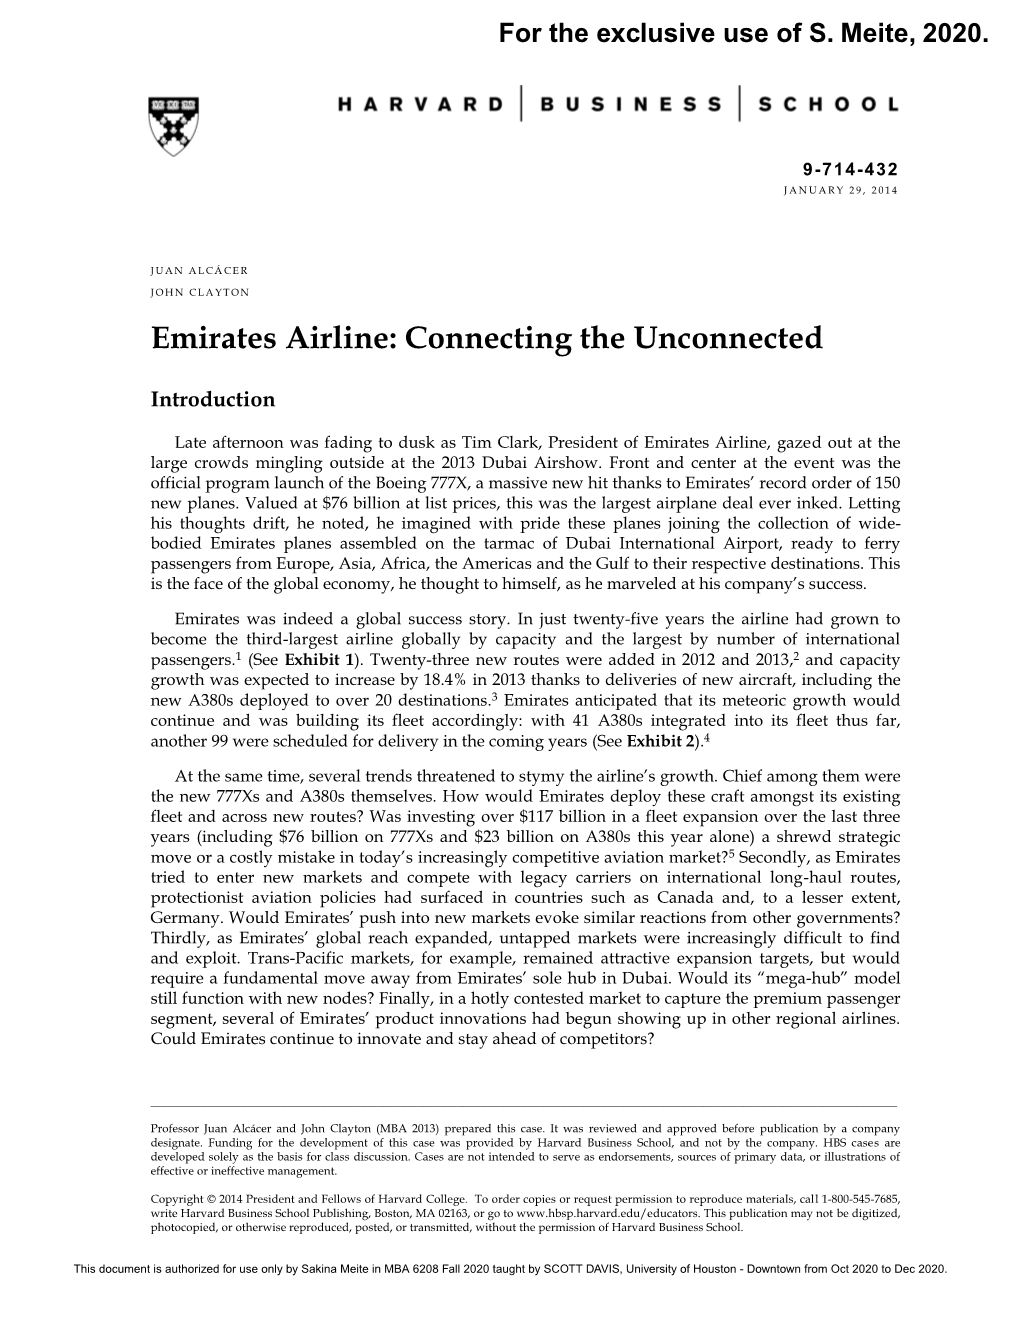 Emirates Airline: Connecting the Unconnected